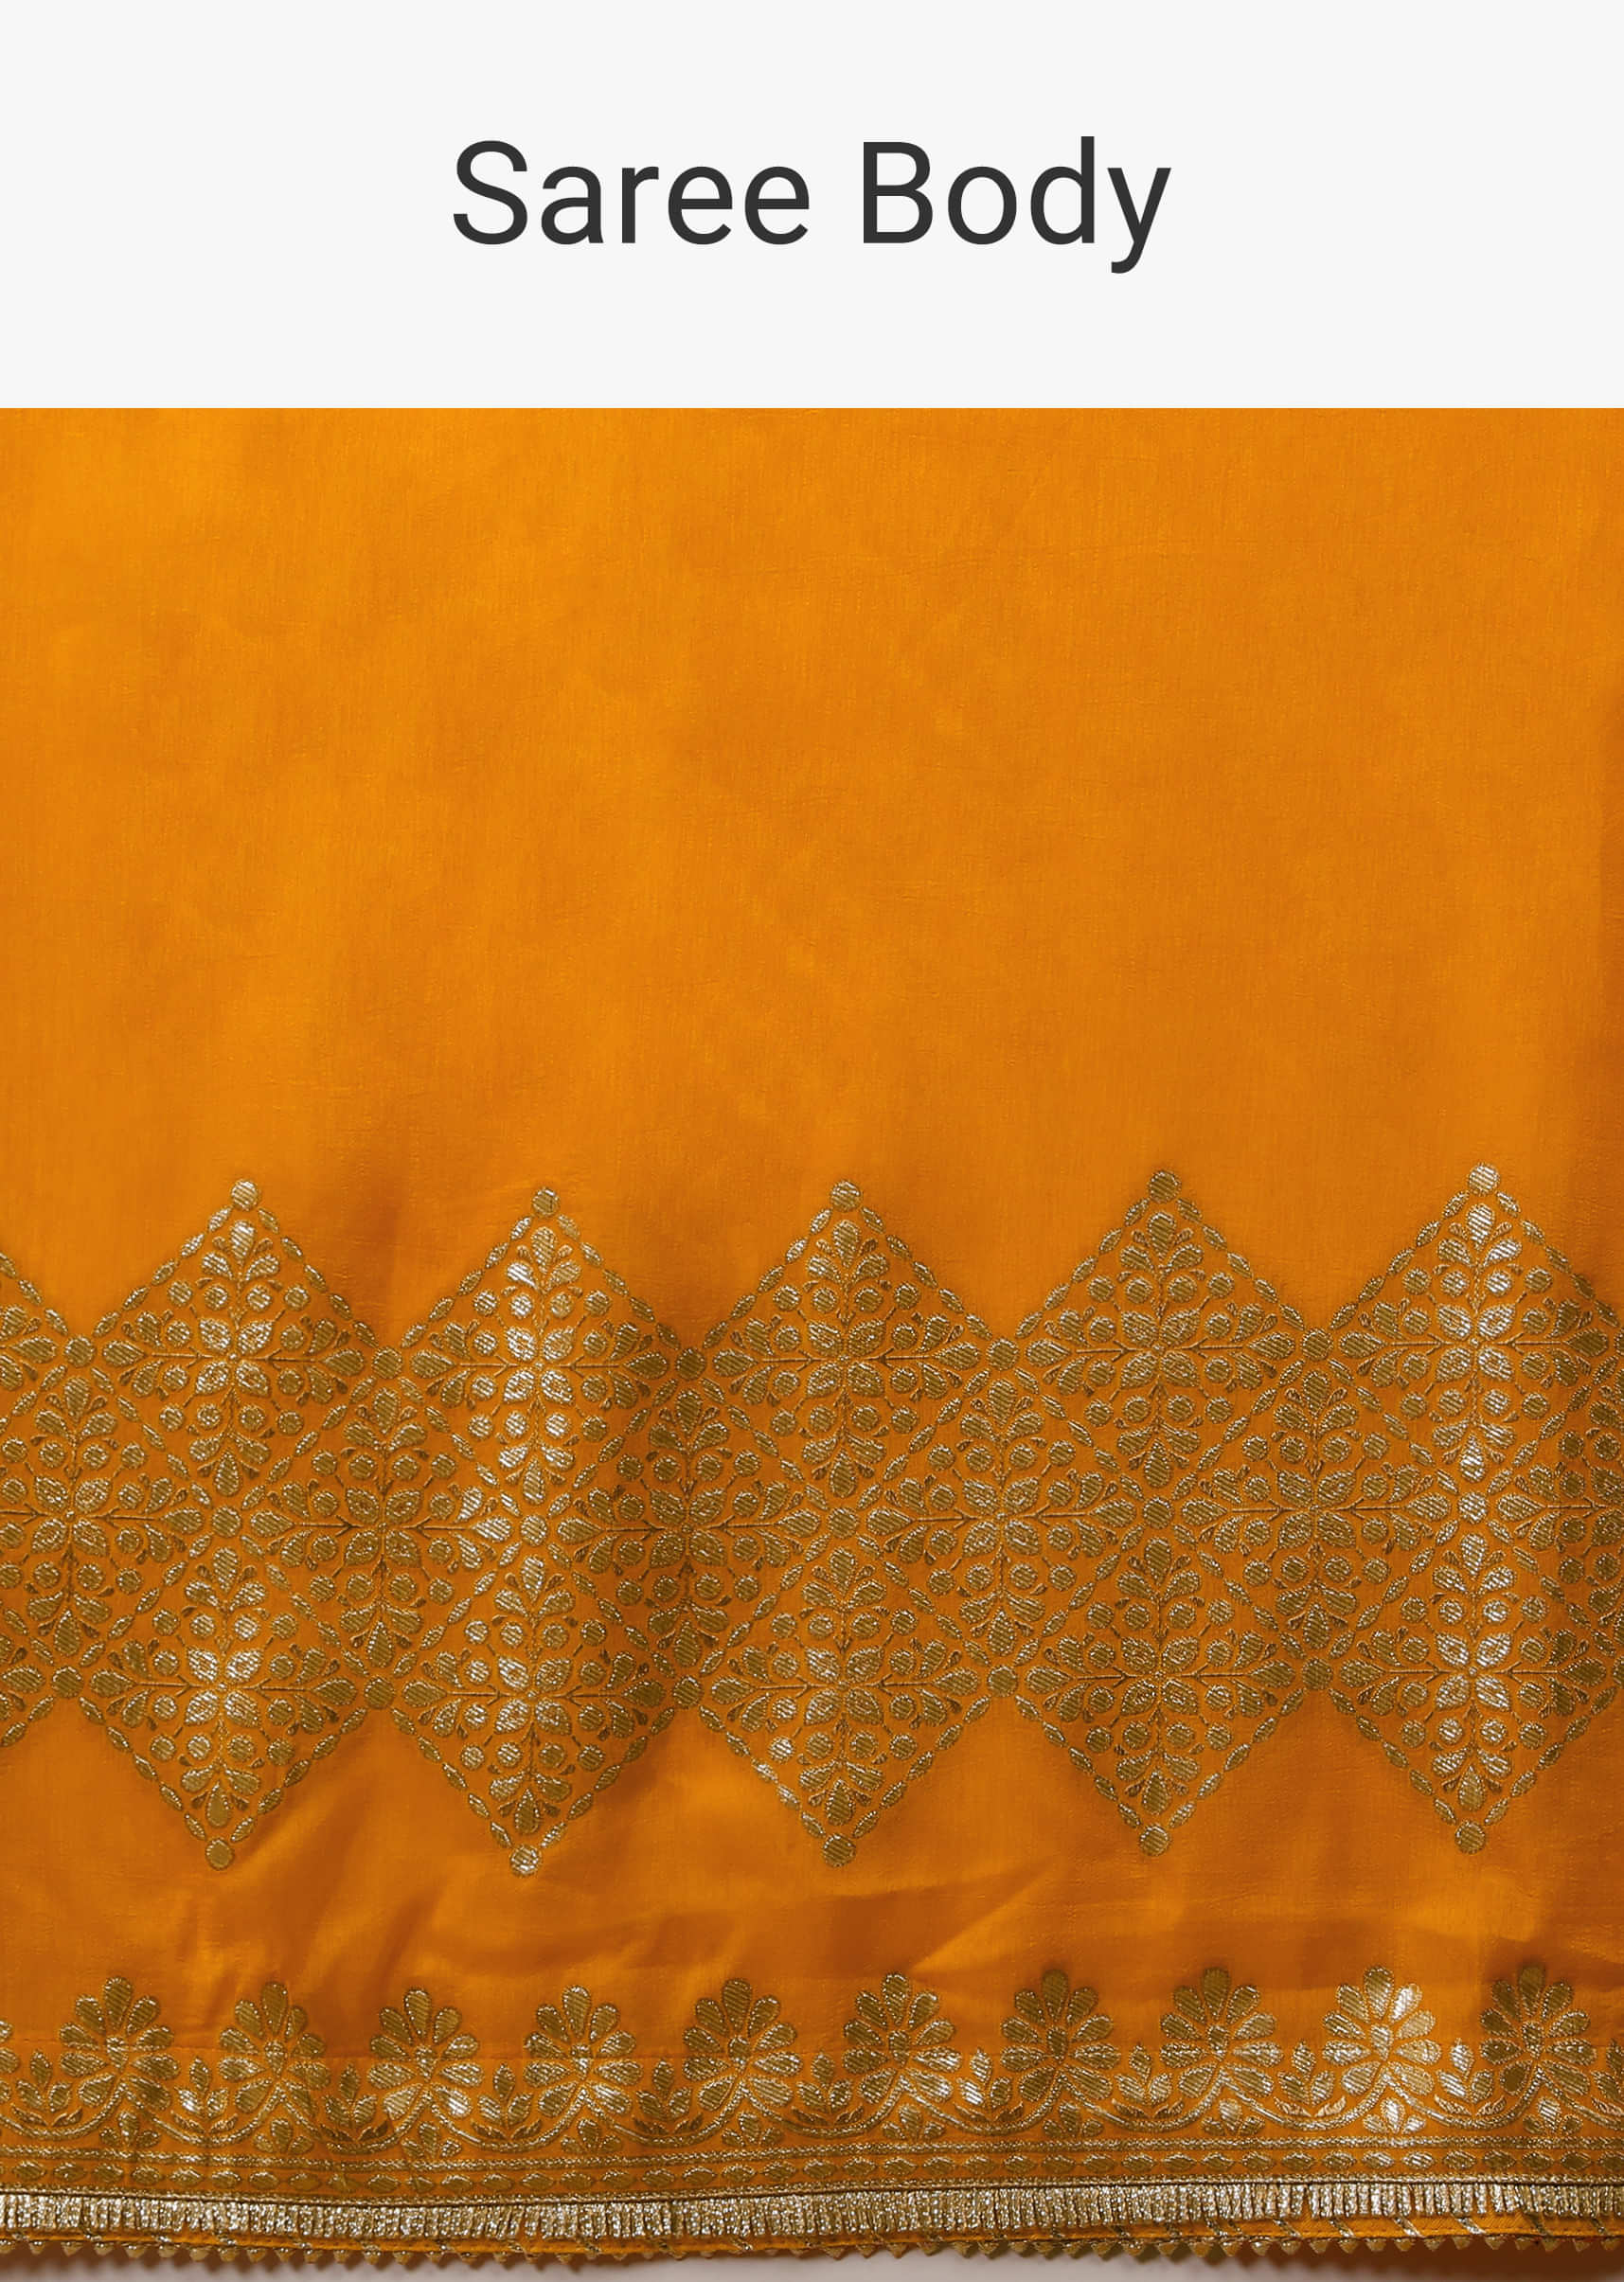 Cadmium Yellow Saree In Dola Silk With Lurex Woven Stripes On The Pallu And Geometric Floral Motifs On The Pleats  